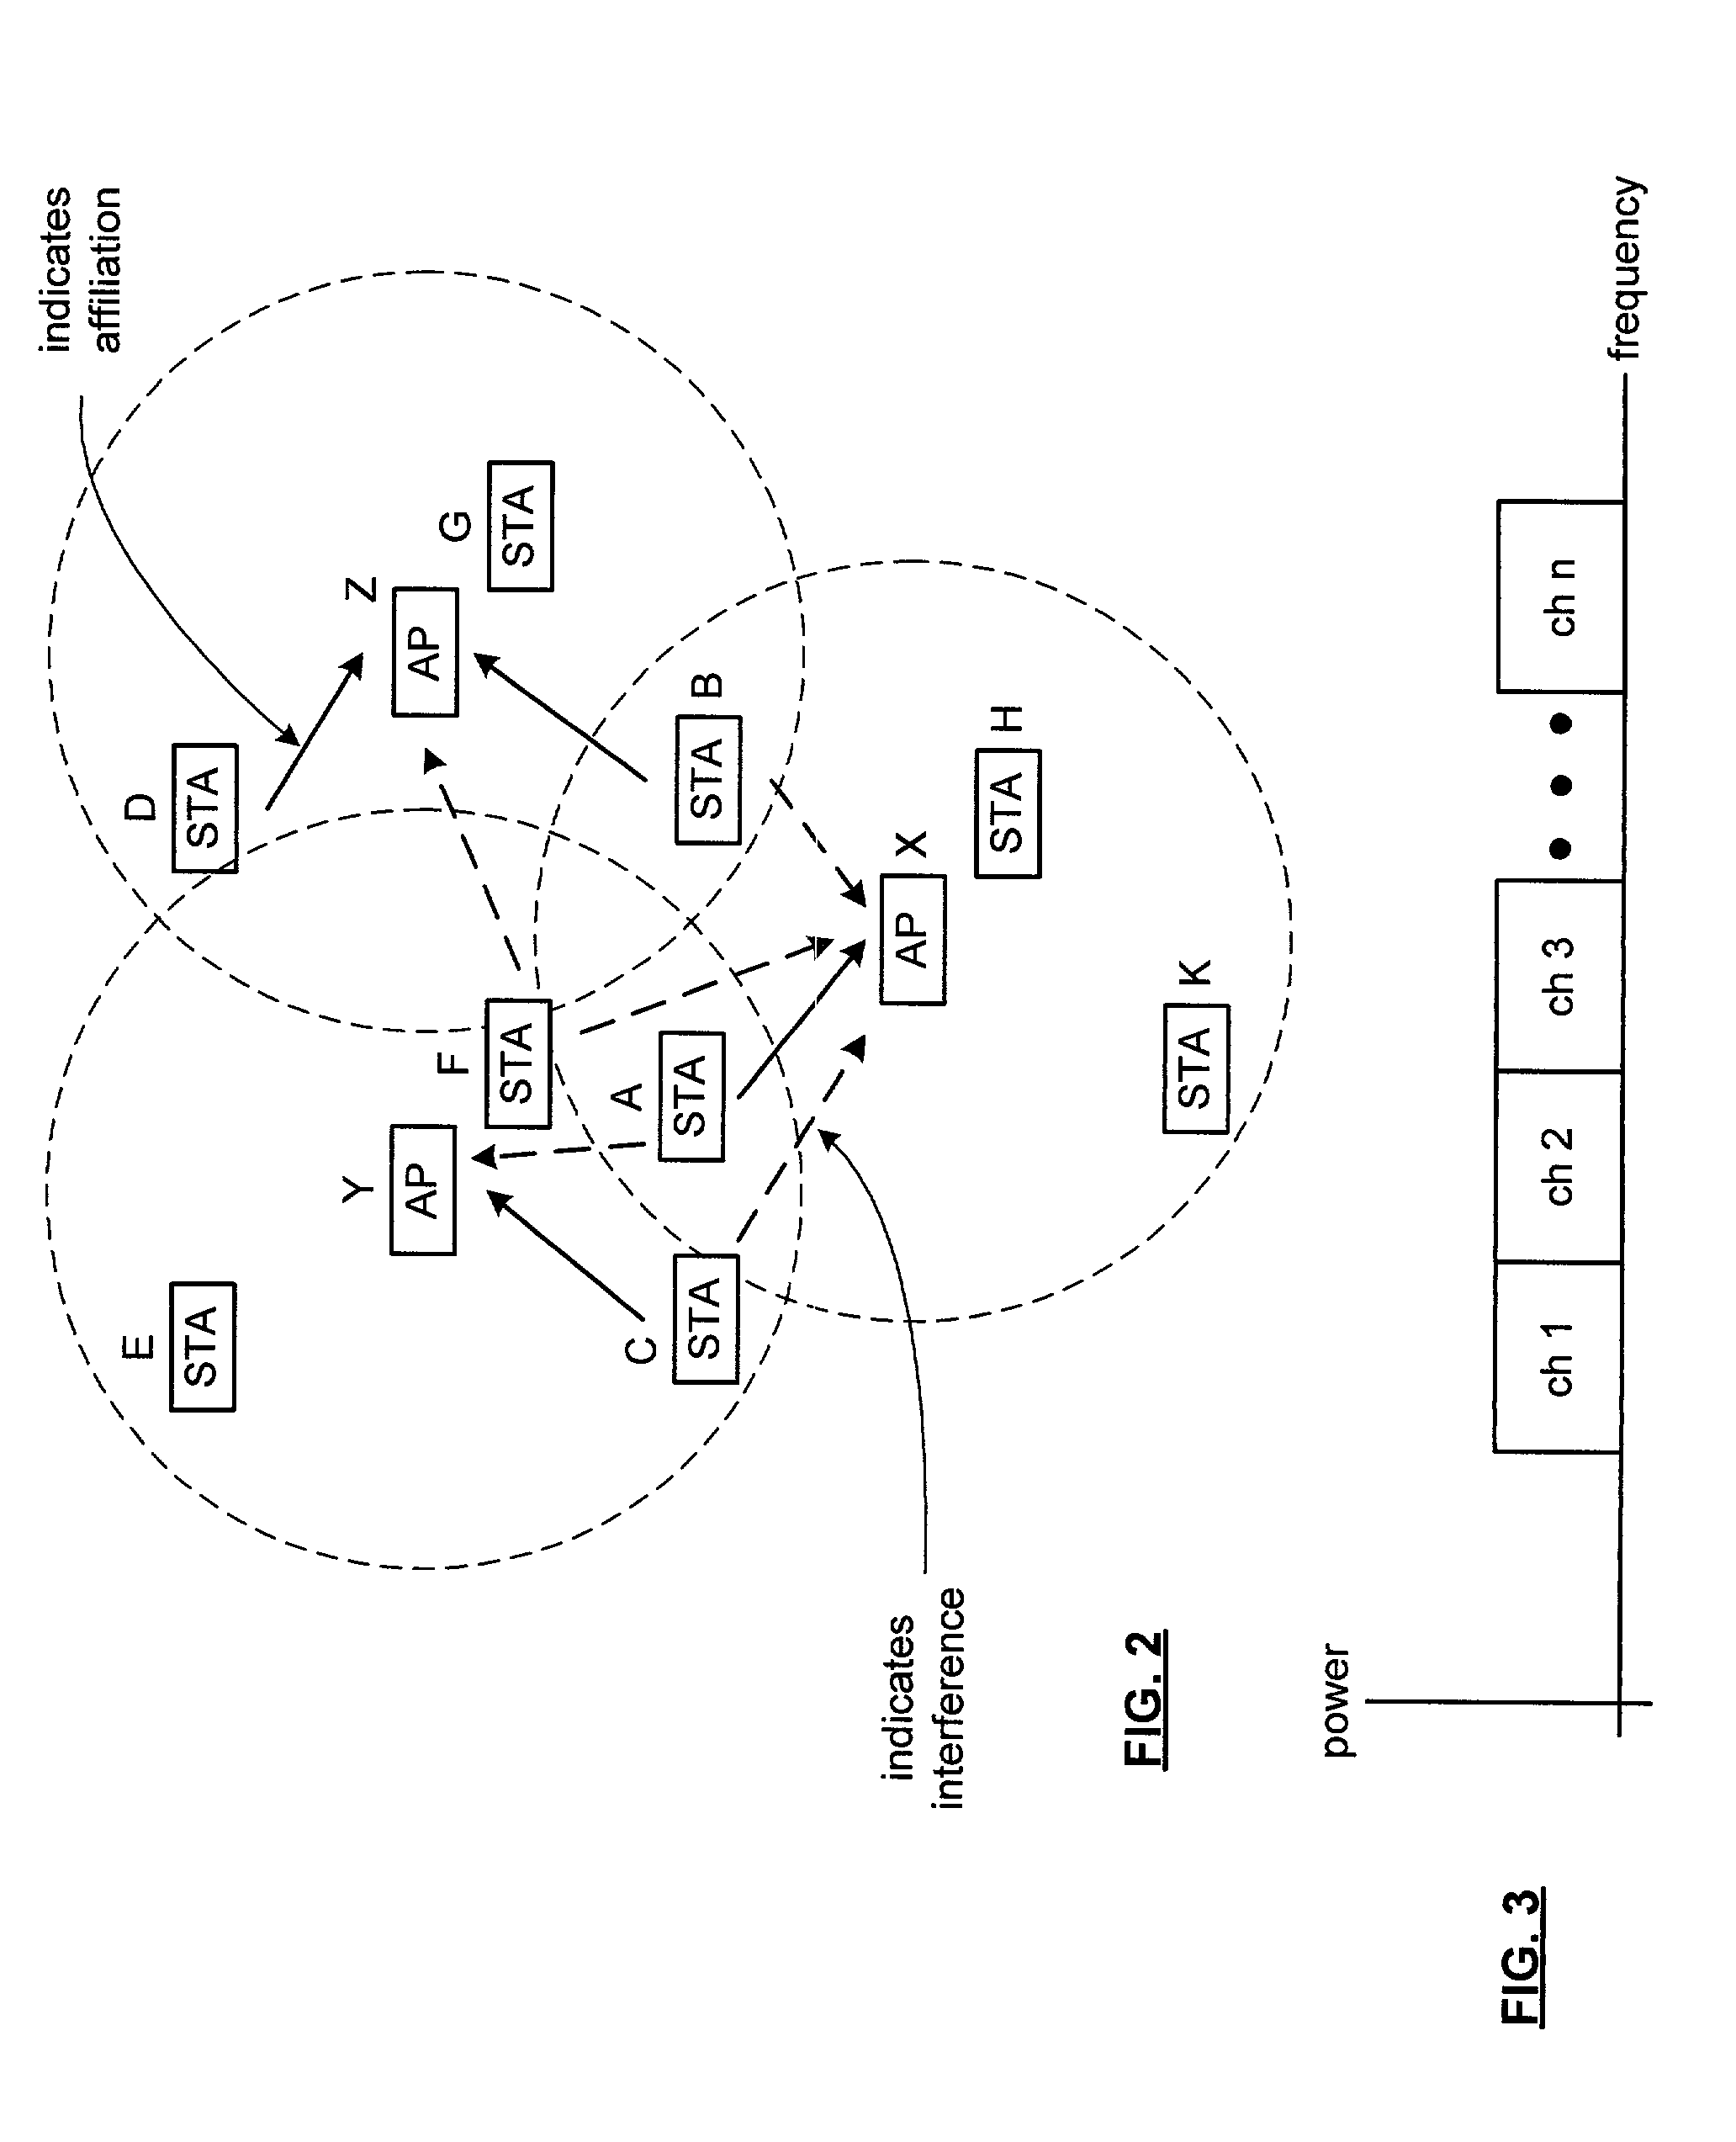 Dynamic frequency selection in a wireless communication network